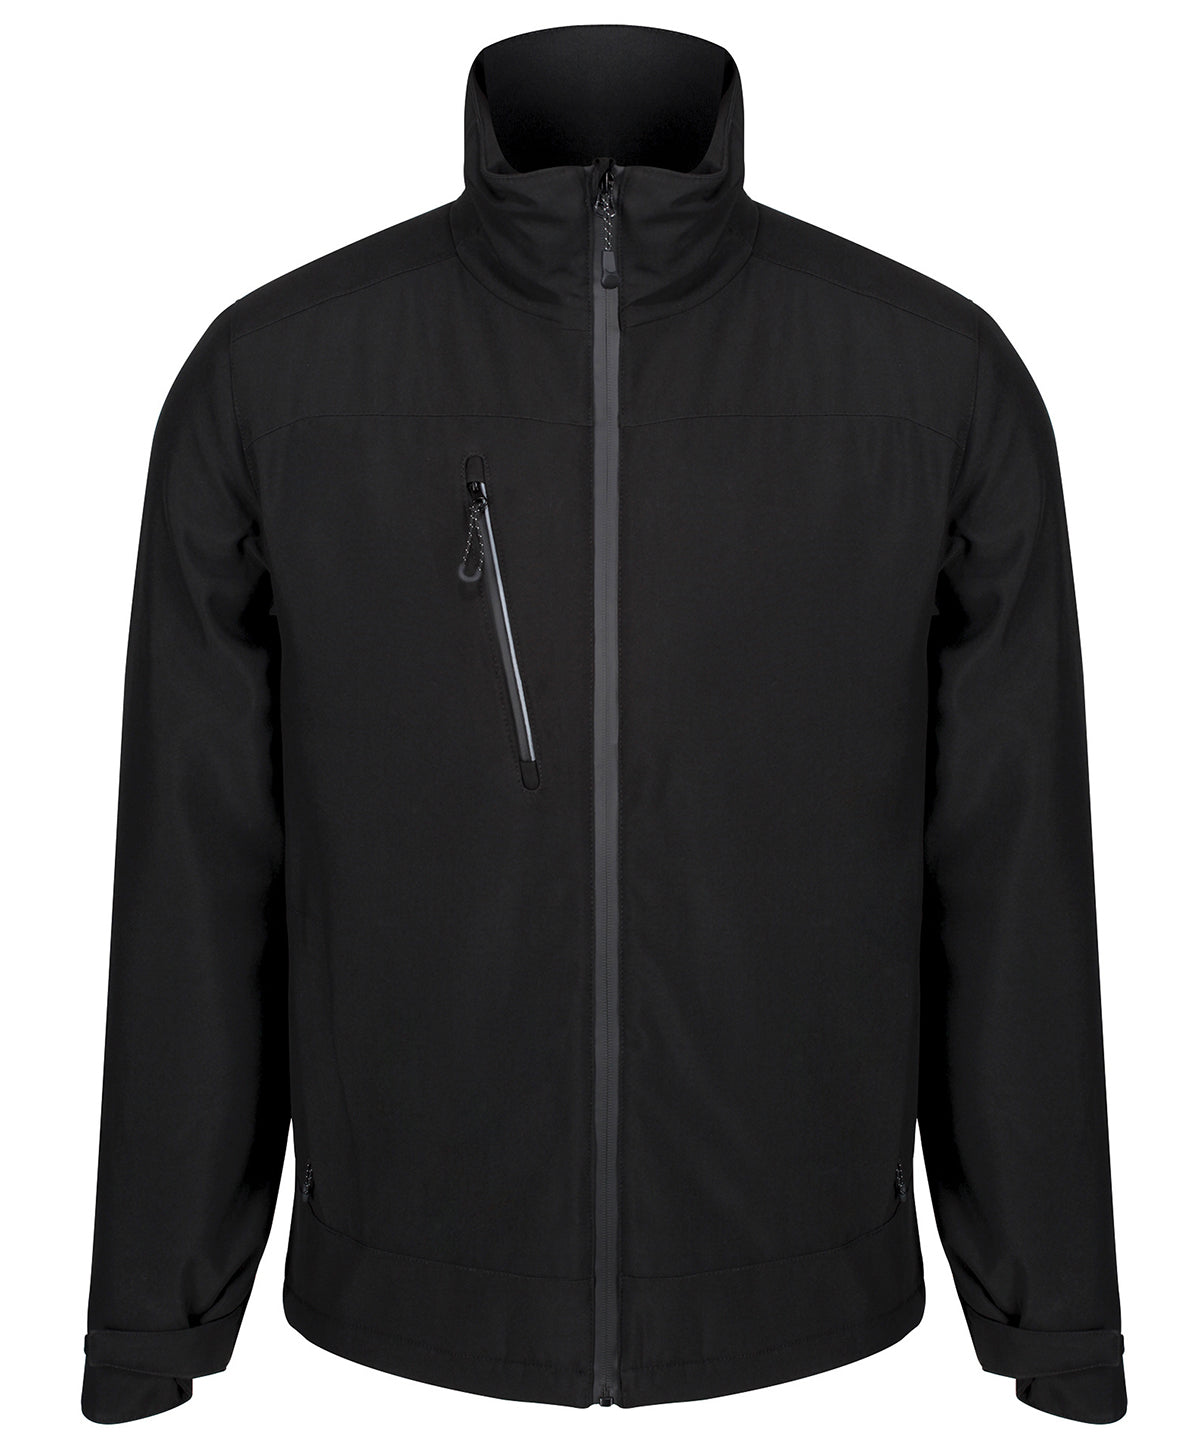 Bifrost insulated softshell jacket